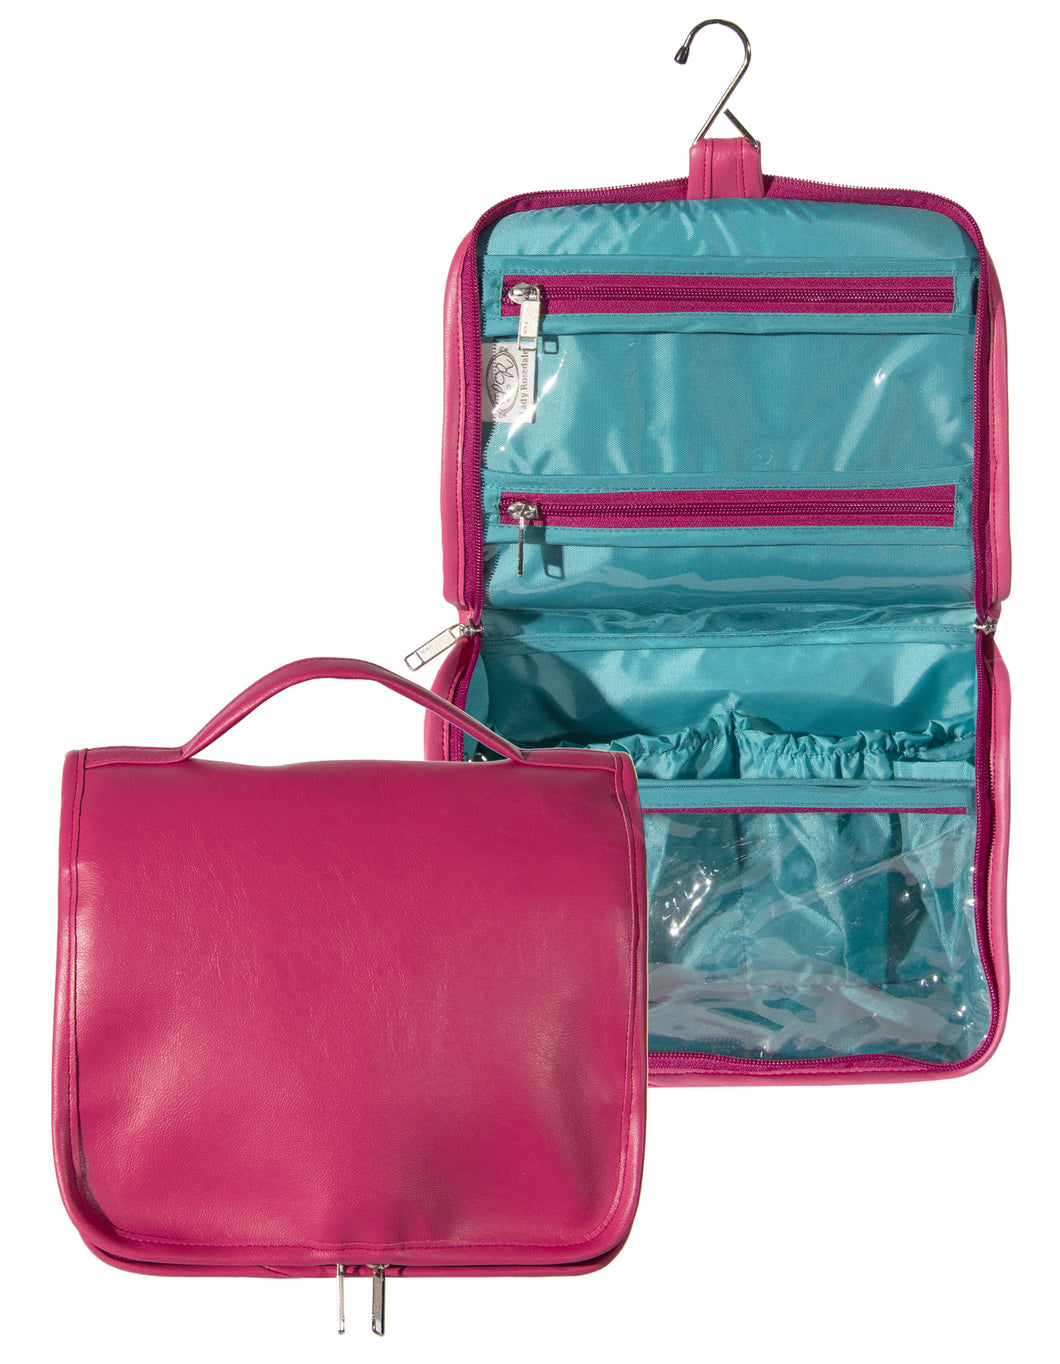 L789-3128 Ultimate Hangup Fresh Berry, Comes with Hanger and double Zipper for easy travelling and to keep everything contained. Part of the Cosmetic and Travel Collection 10.5